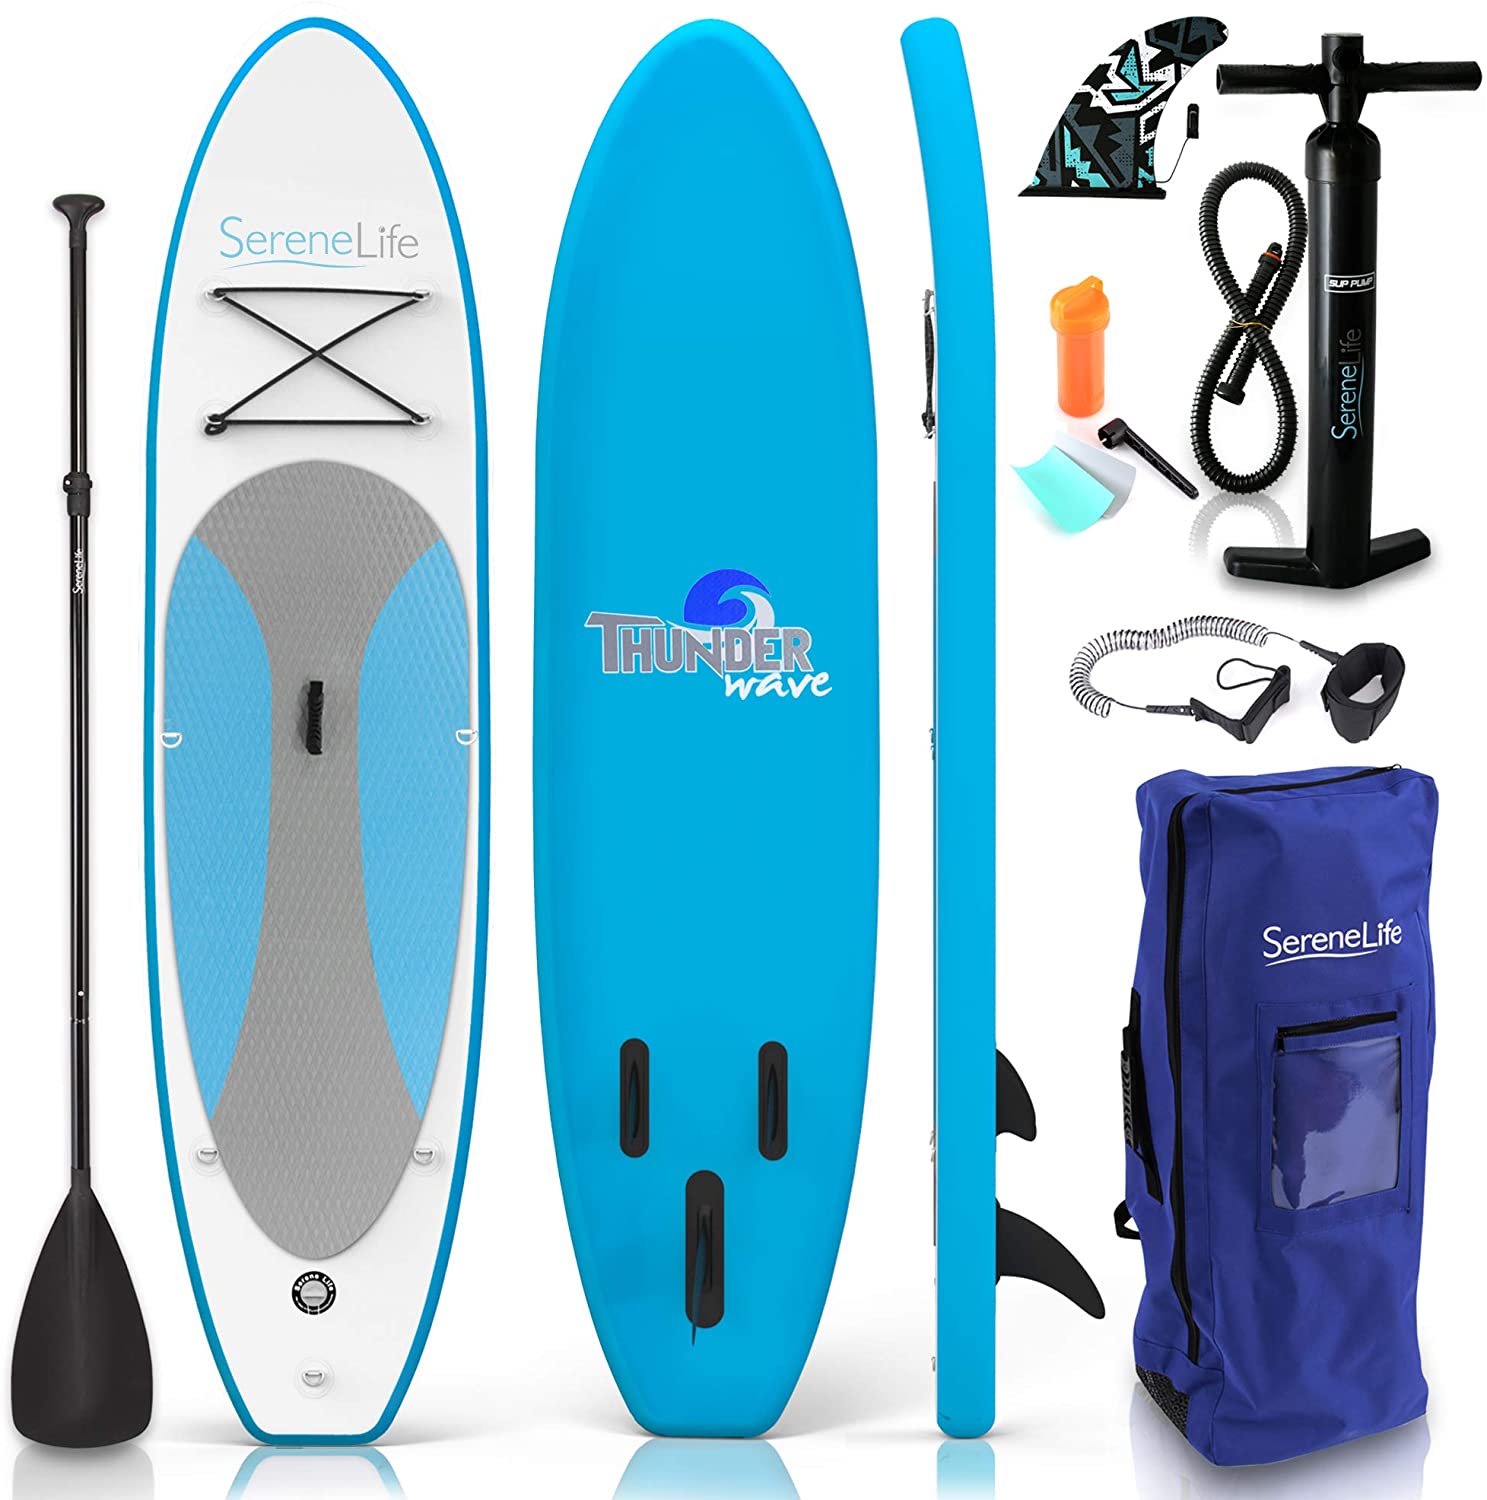 Serene Life Inflatavle Stand Up Paddle Board